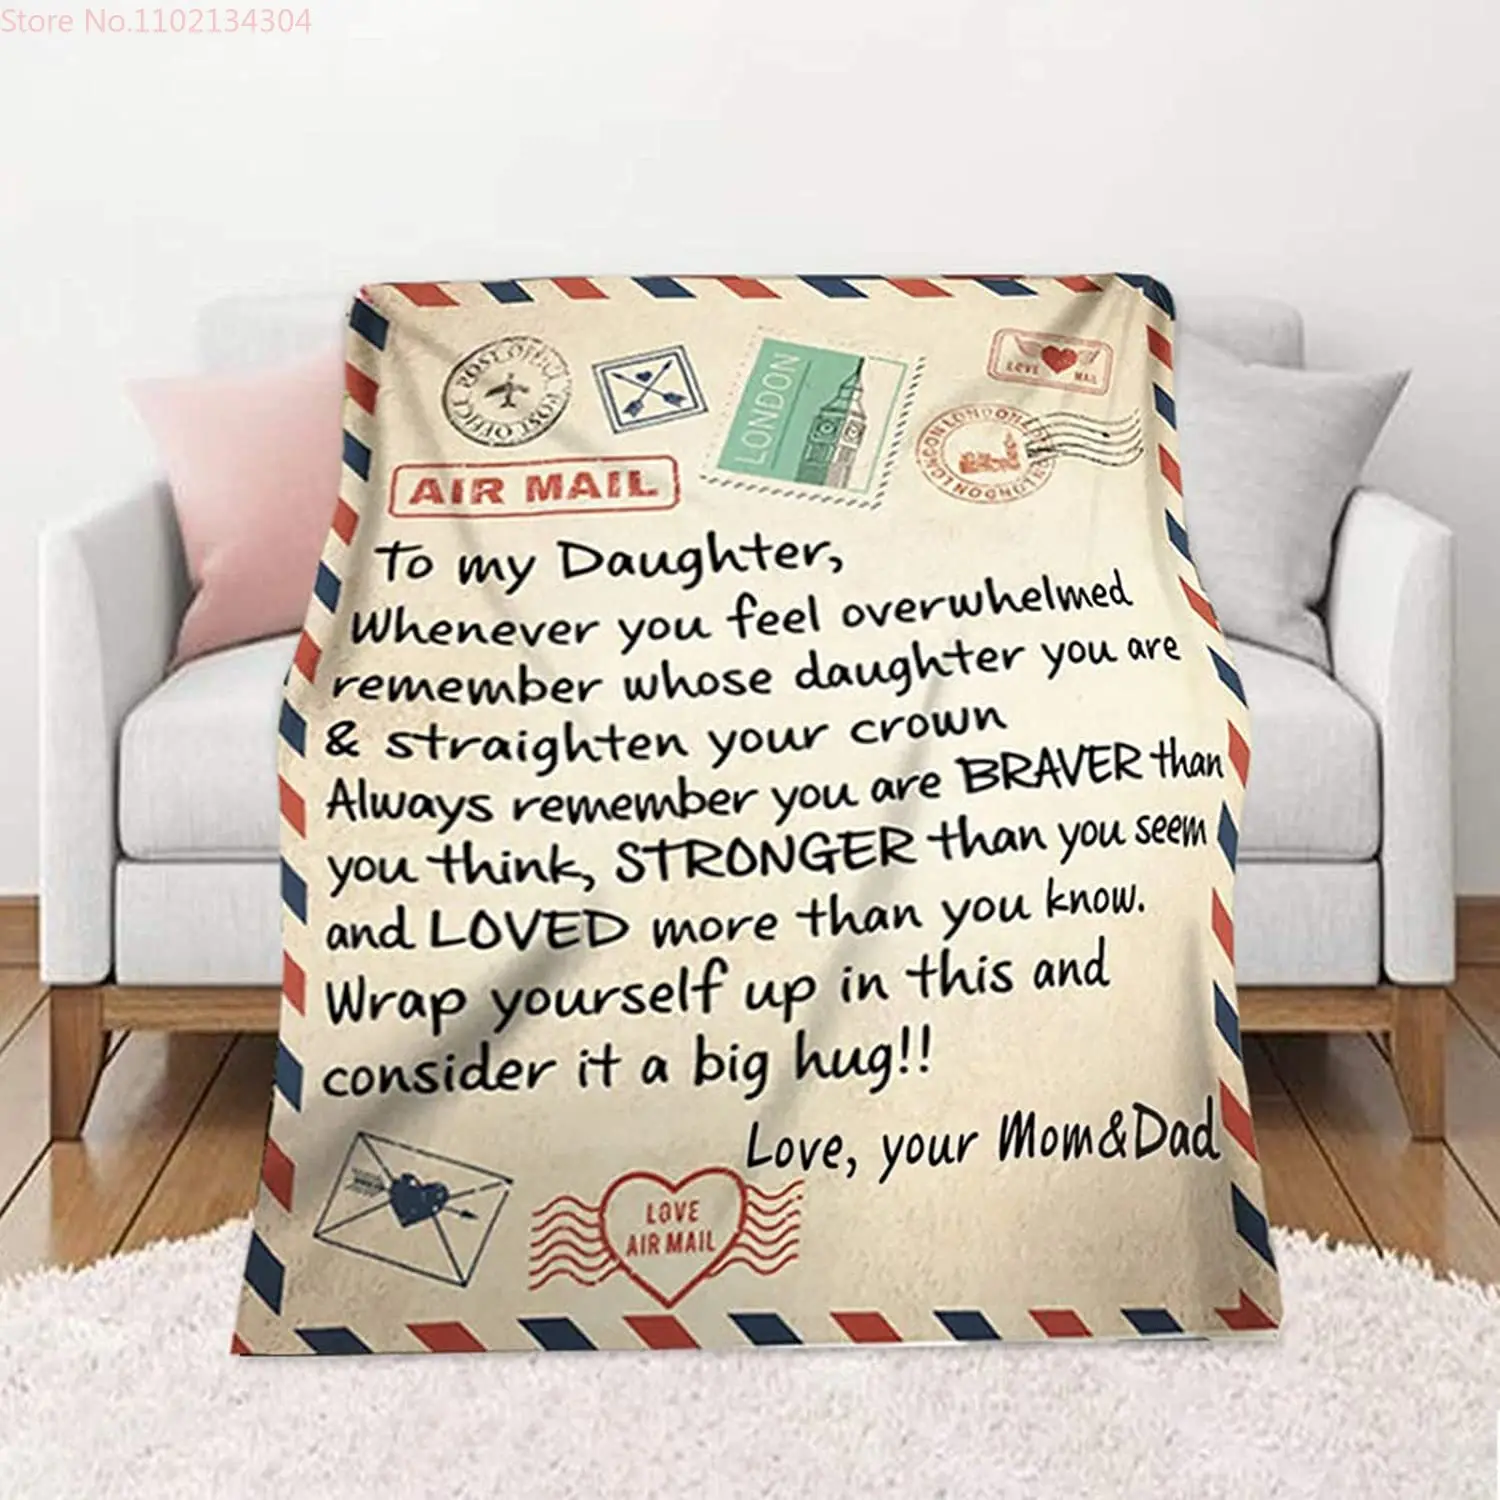 

Flannel Blanket To My Daughter Letter Printed Stamp Quilts Dad Mom For Daughter's Air Mail Blanket Positive Encourage Love Gift.